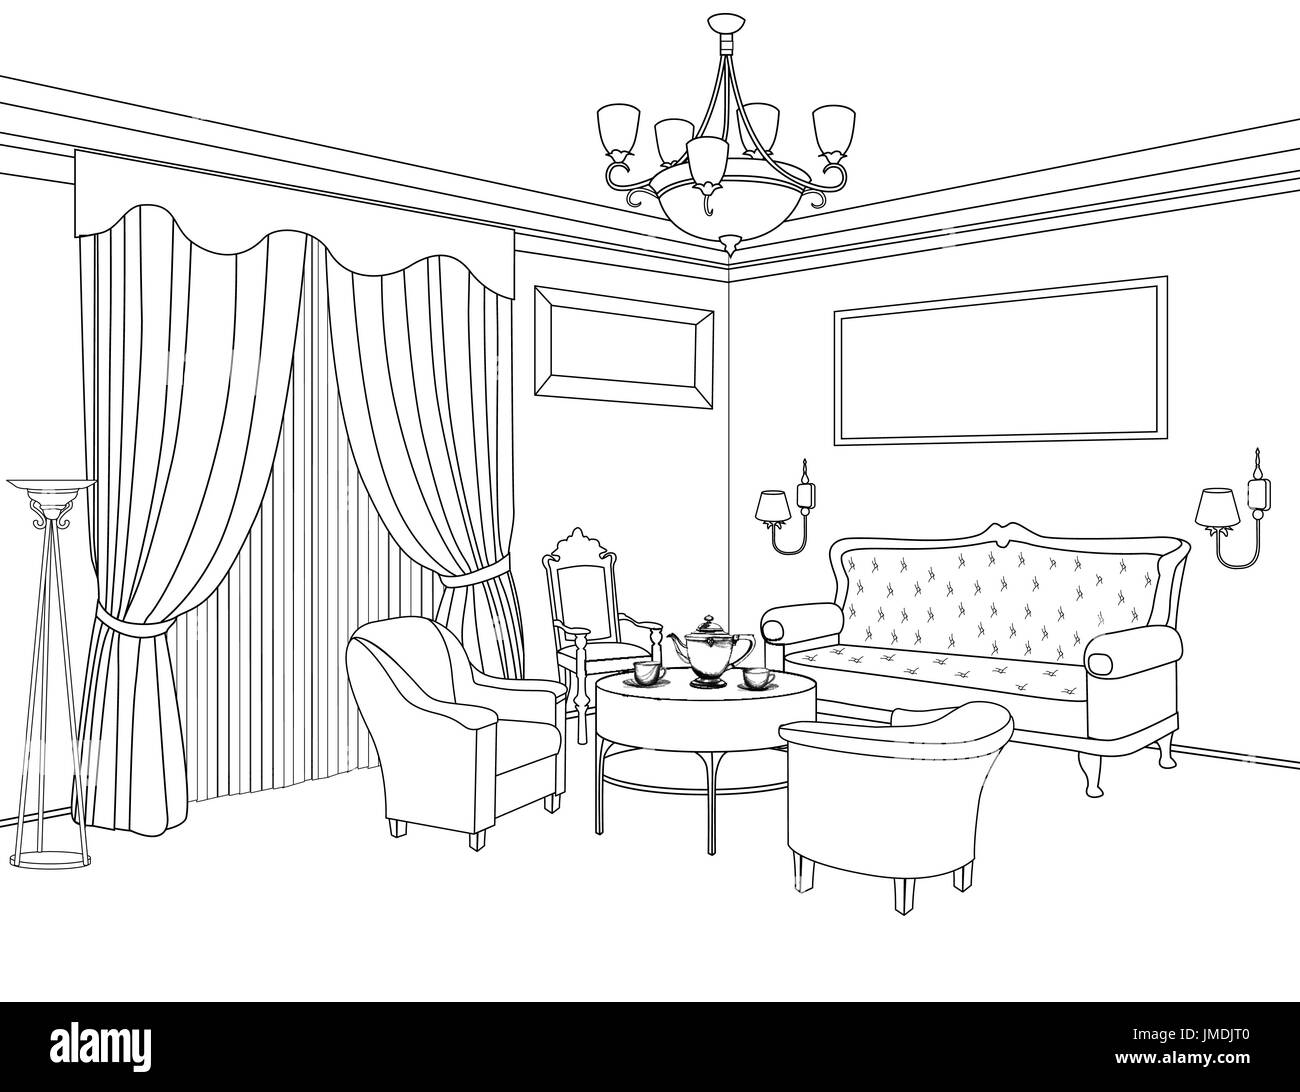 Sketches Furniture. Modern Interior Objects Chairs Beds Technical Drawings  for Architectural Design Projects Recent Stock Vector - Illustration of  table, room: 213976128